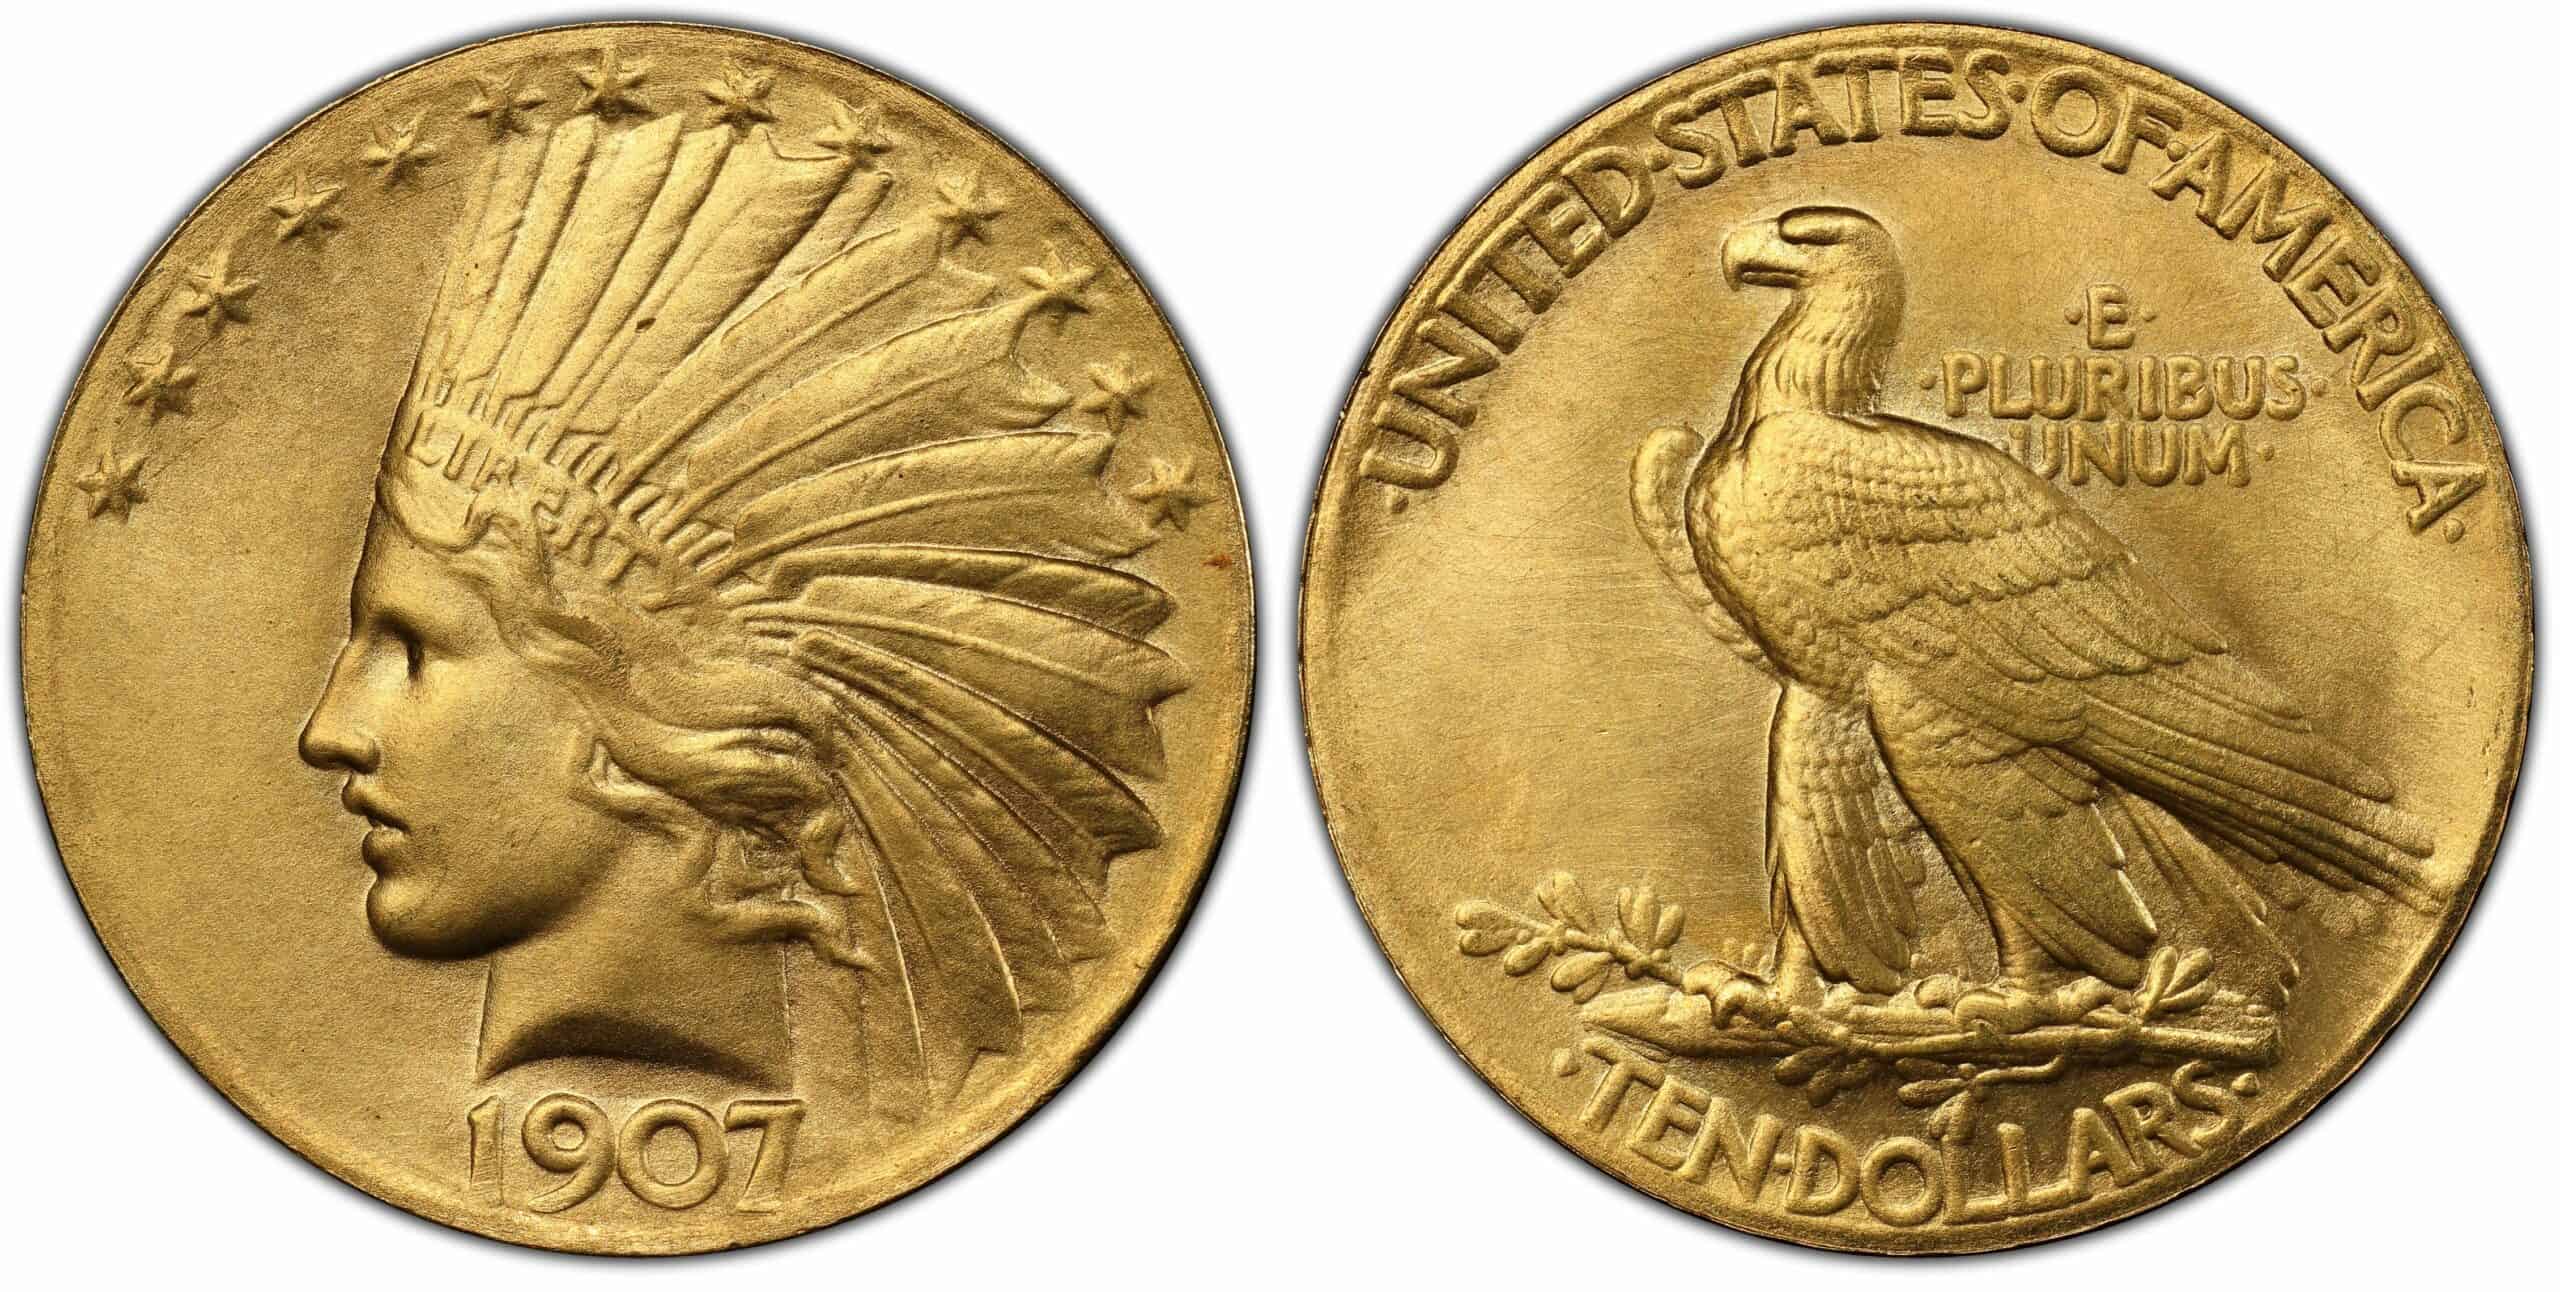 Indian Head Ten Dollar Coin with a "Wire Rim" (1907)